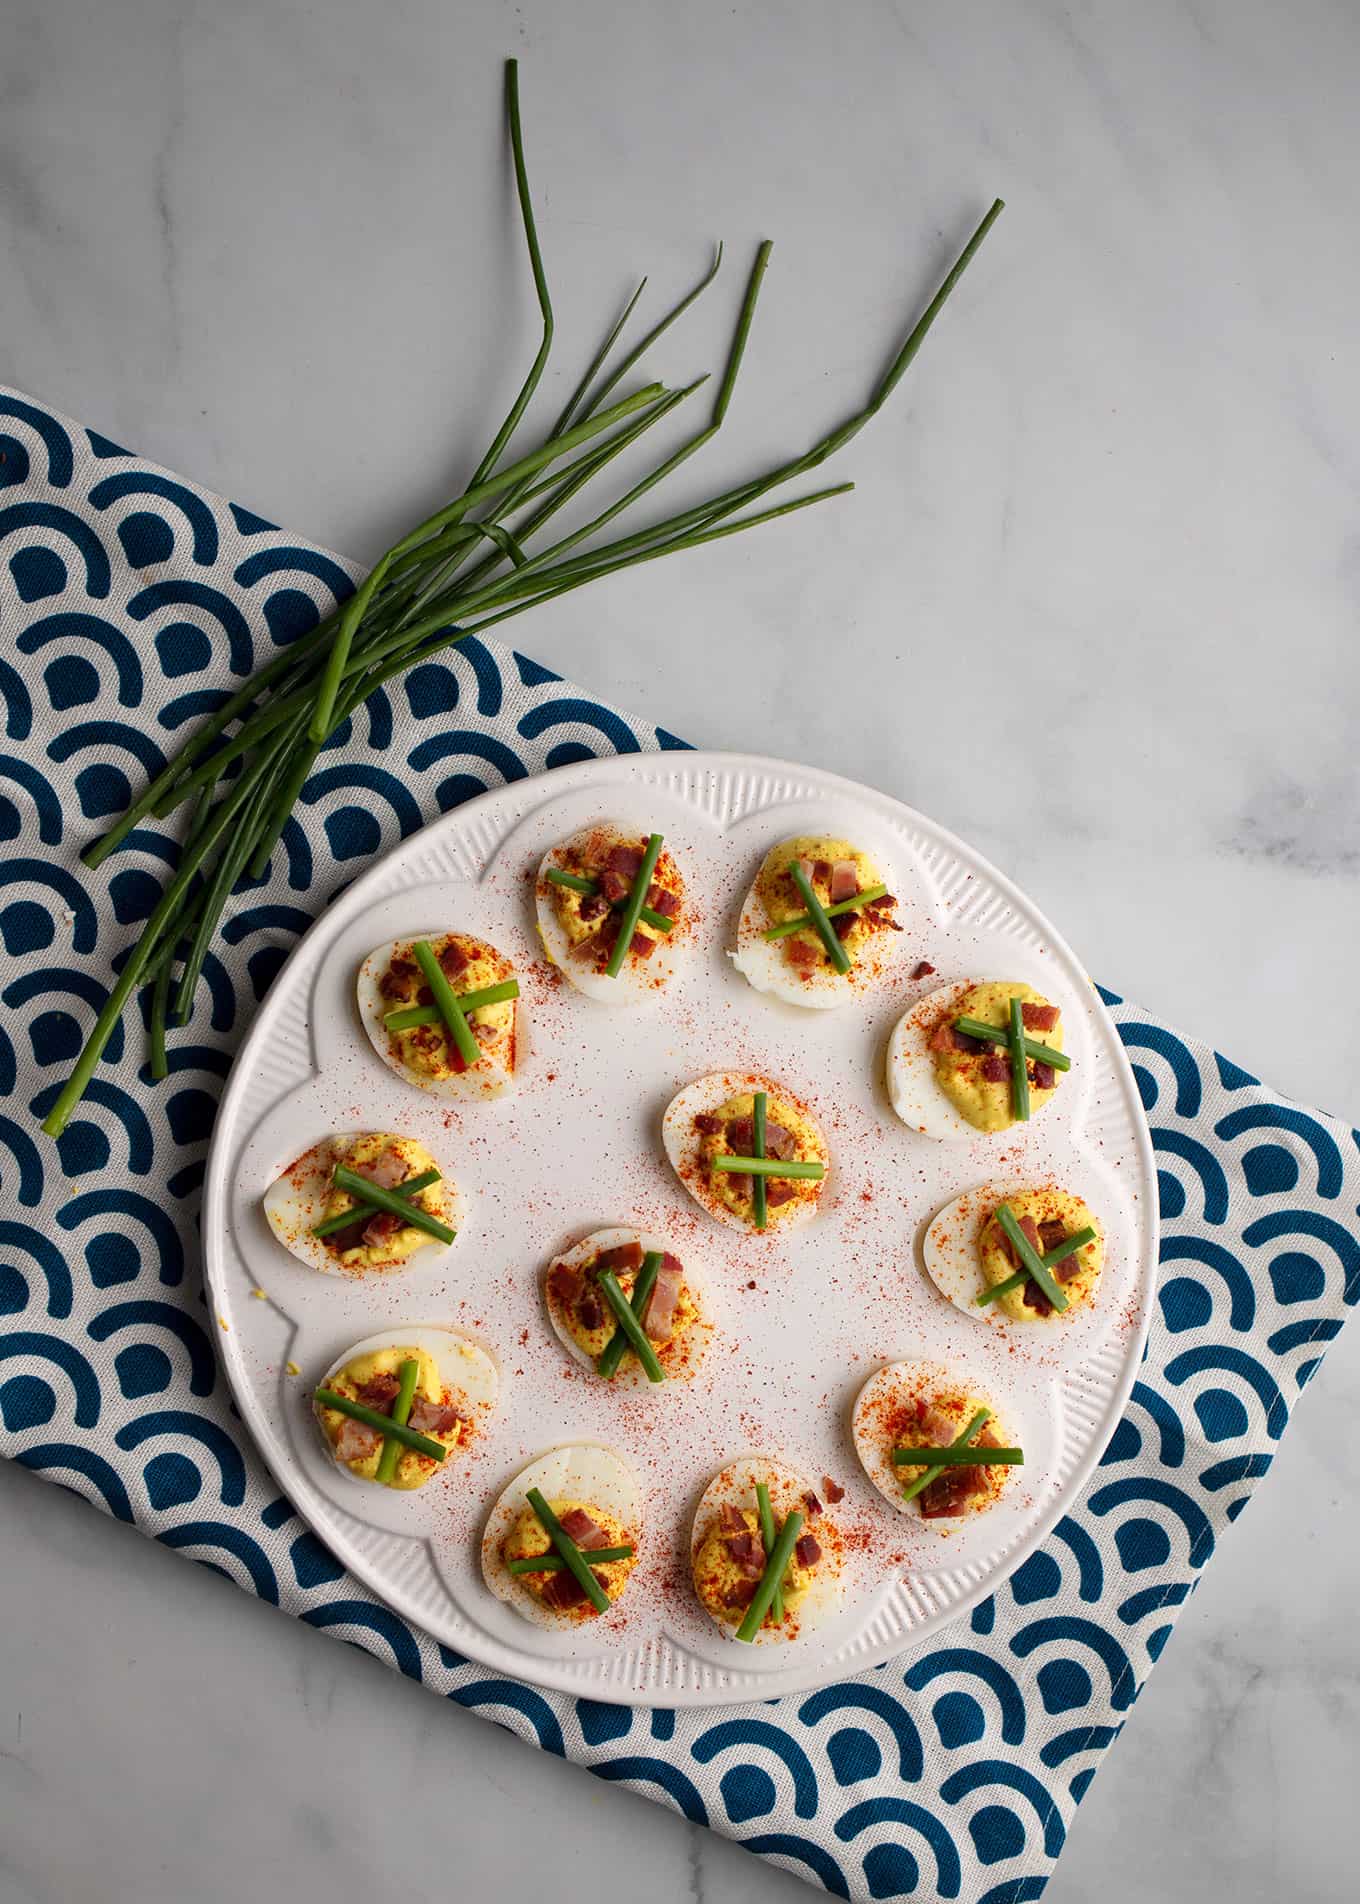 A deviled egg plate with Simple Deviled Eggs